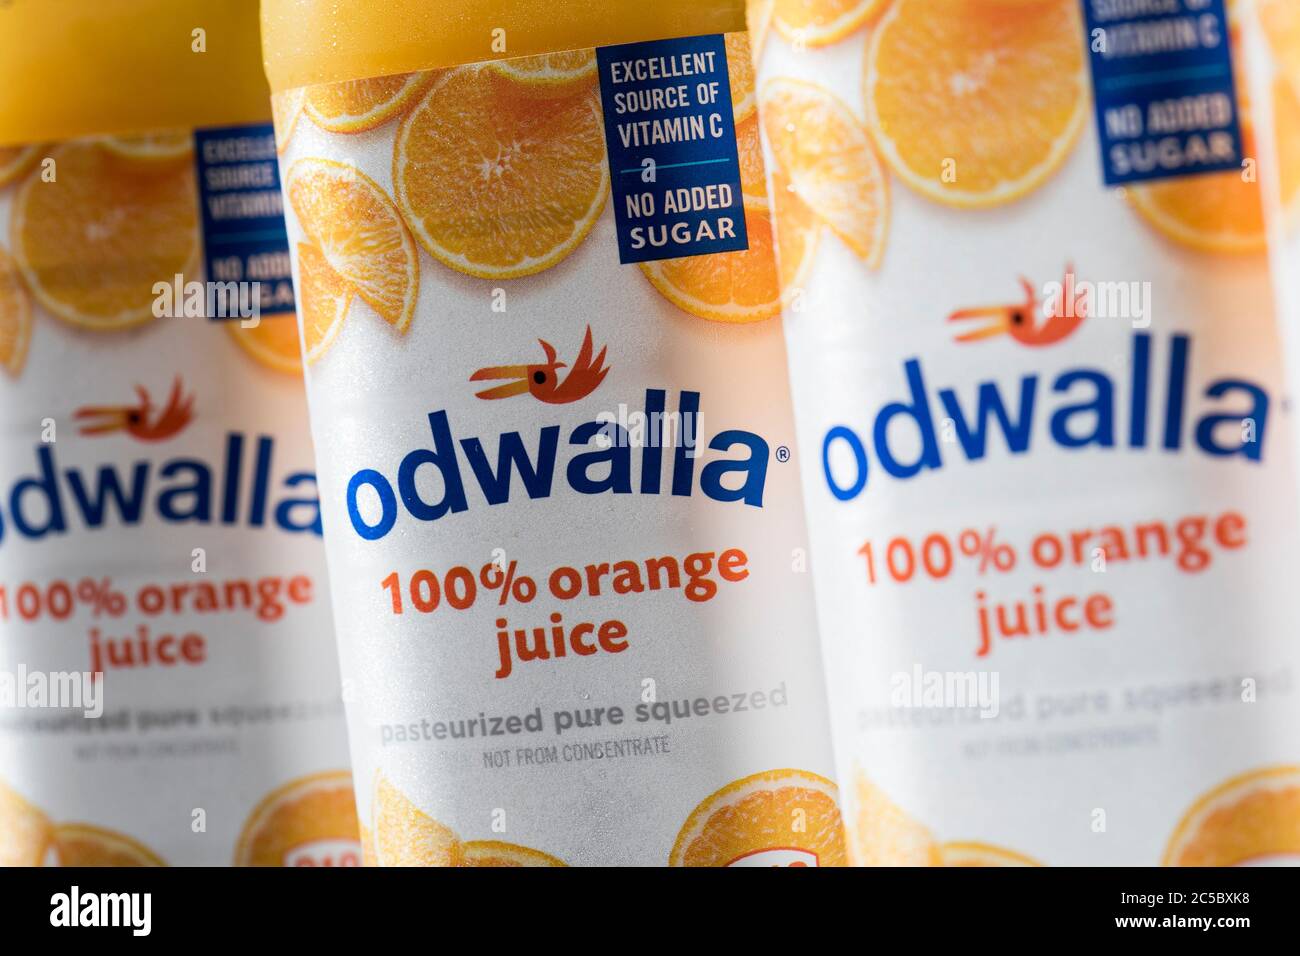 Bottles of Odwalla juice products arranged for a photo. Stock Photo